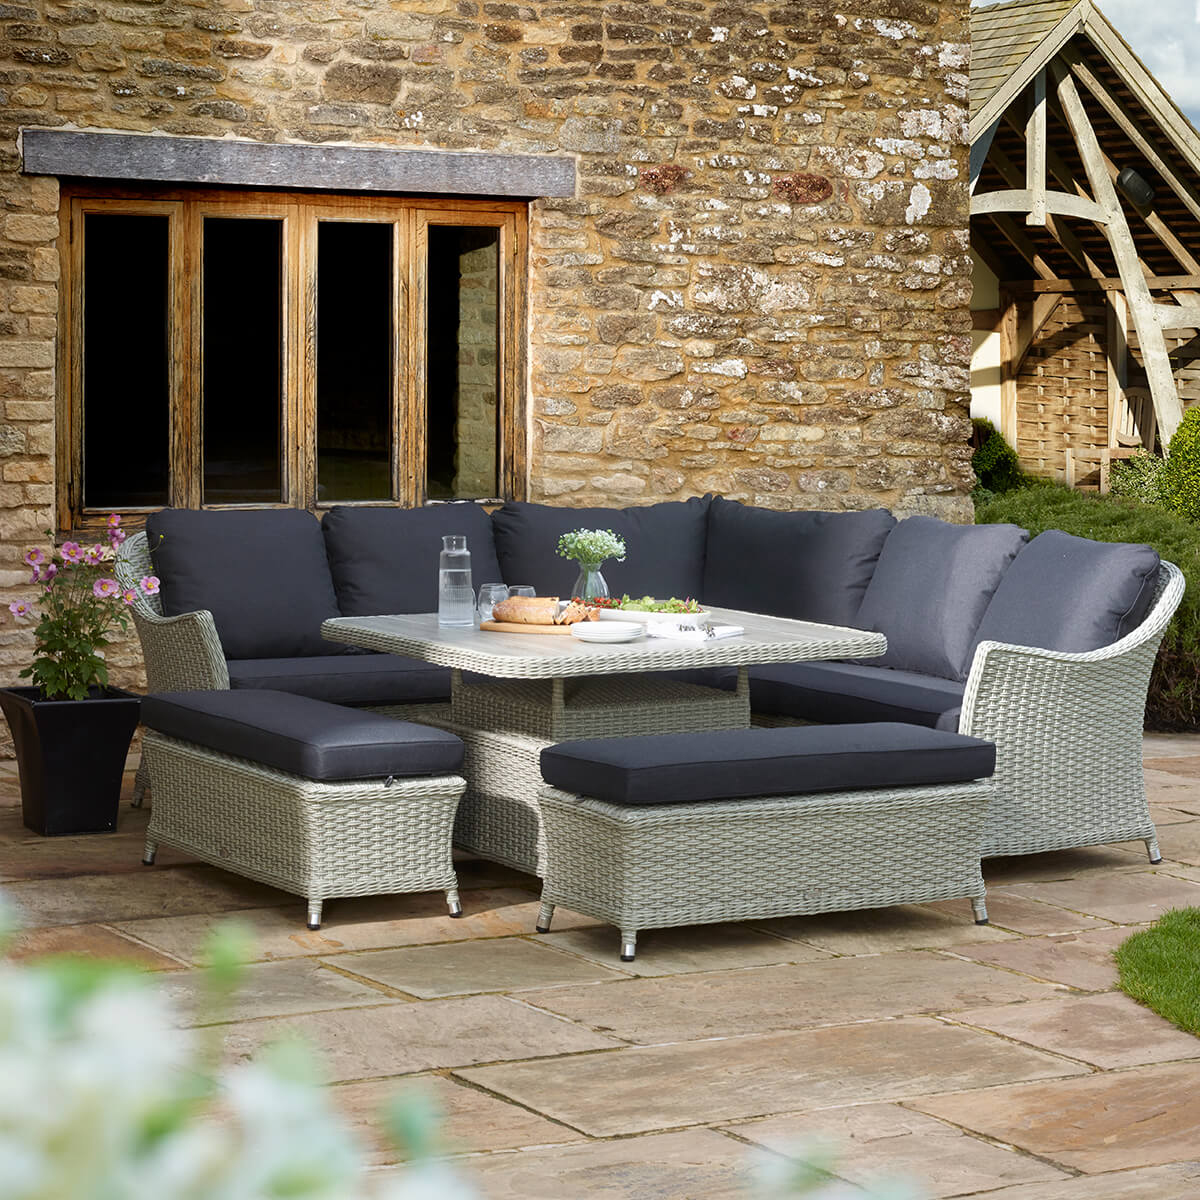 How To Clean Garden Furniture